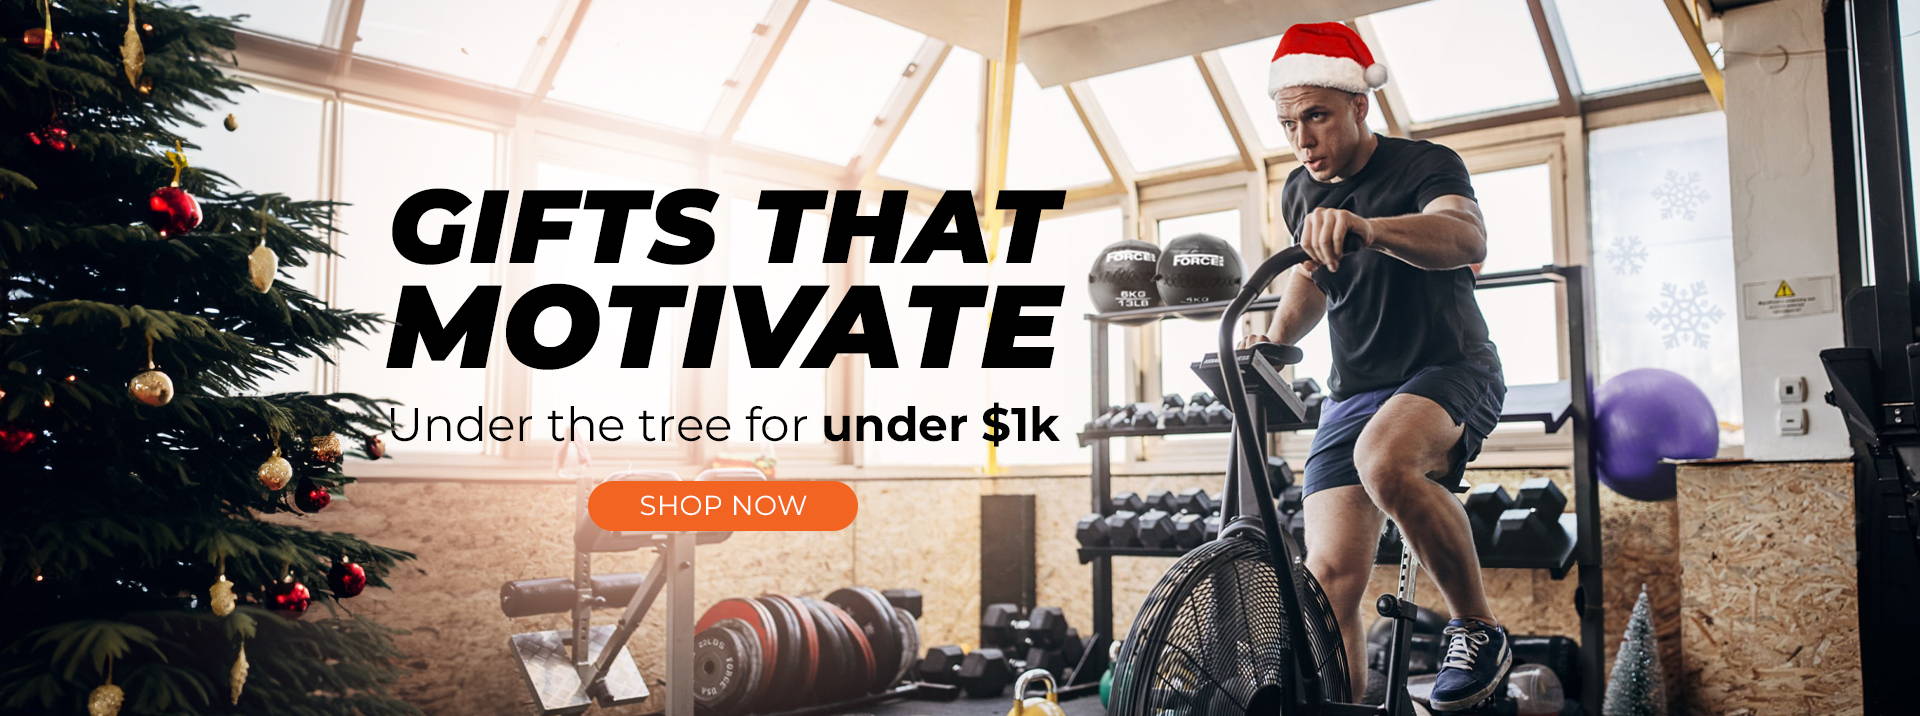 Man exercising on an Air Bike in a home gym, surrounded by gym equipment and festive Christmas decorations, with text overlay: 'Gifts that Motivate - Find the Perfect Fitness Present Under Your Tree for Under $1k.